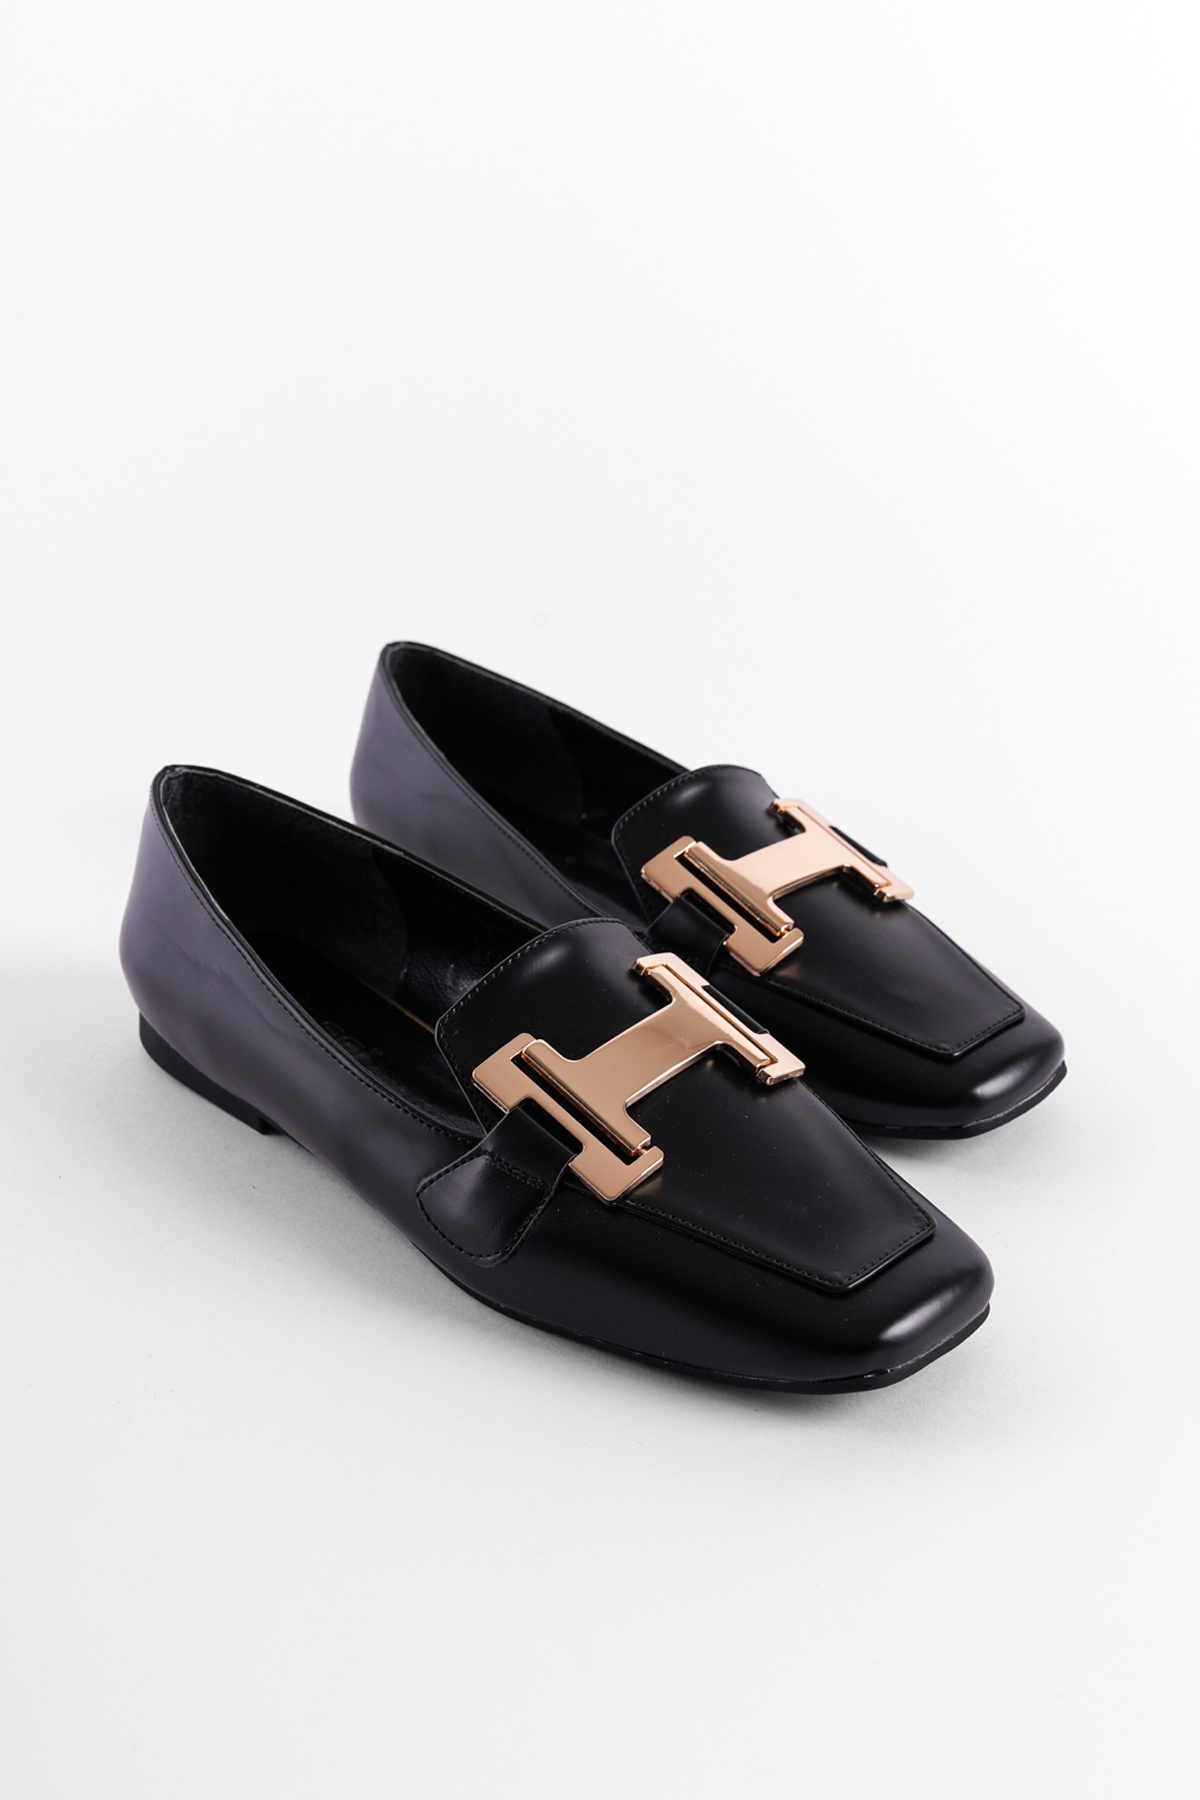 Capone Outfitters Women's Flat Toe Metal Buckle Accessory Loafer